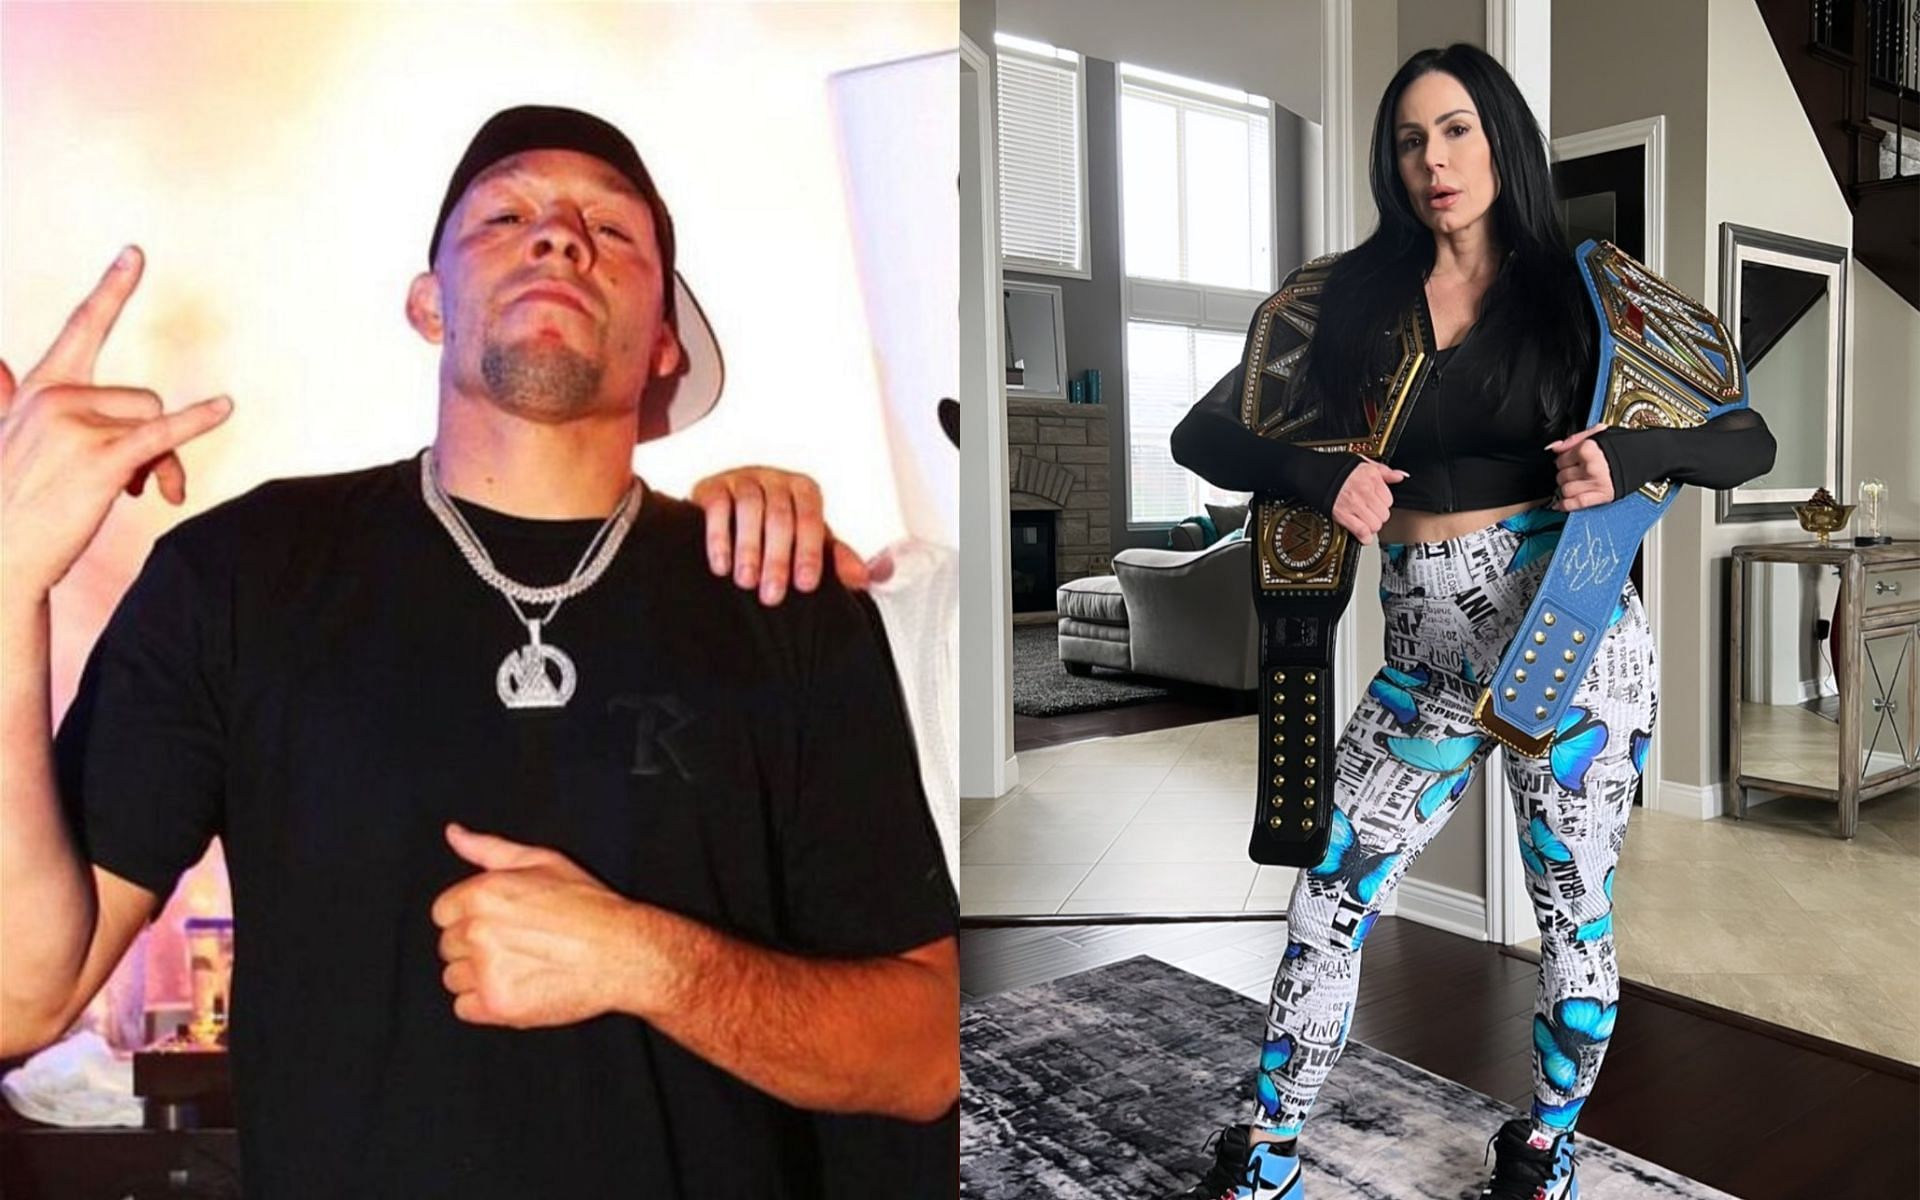 Nate Diaz [Left] Kendra Lust [Right] [Images courtesy: @MMAFighting and @KendraLust (Twitter)]